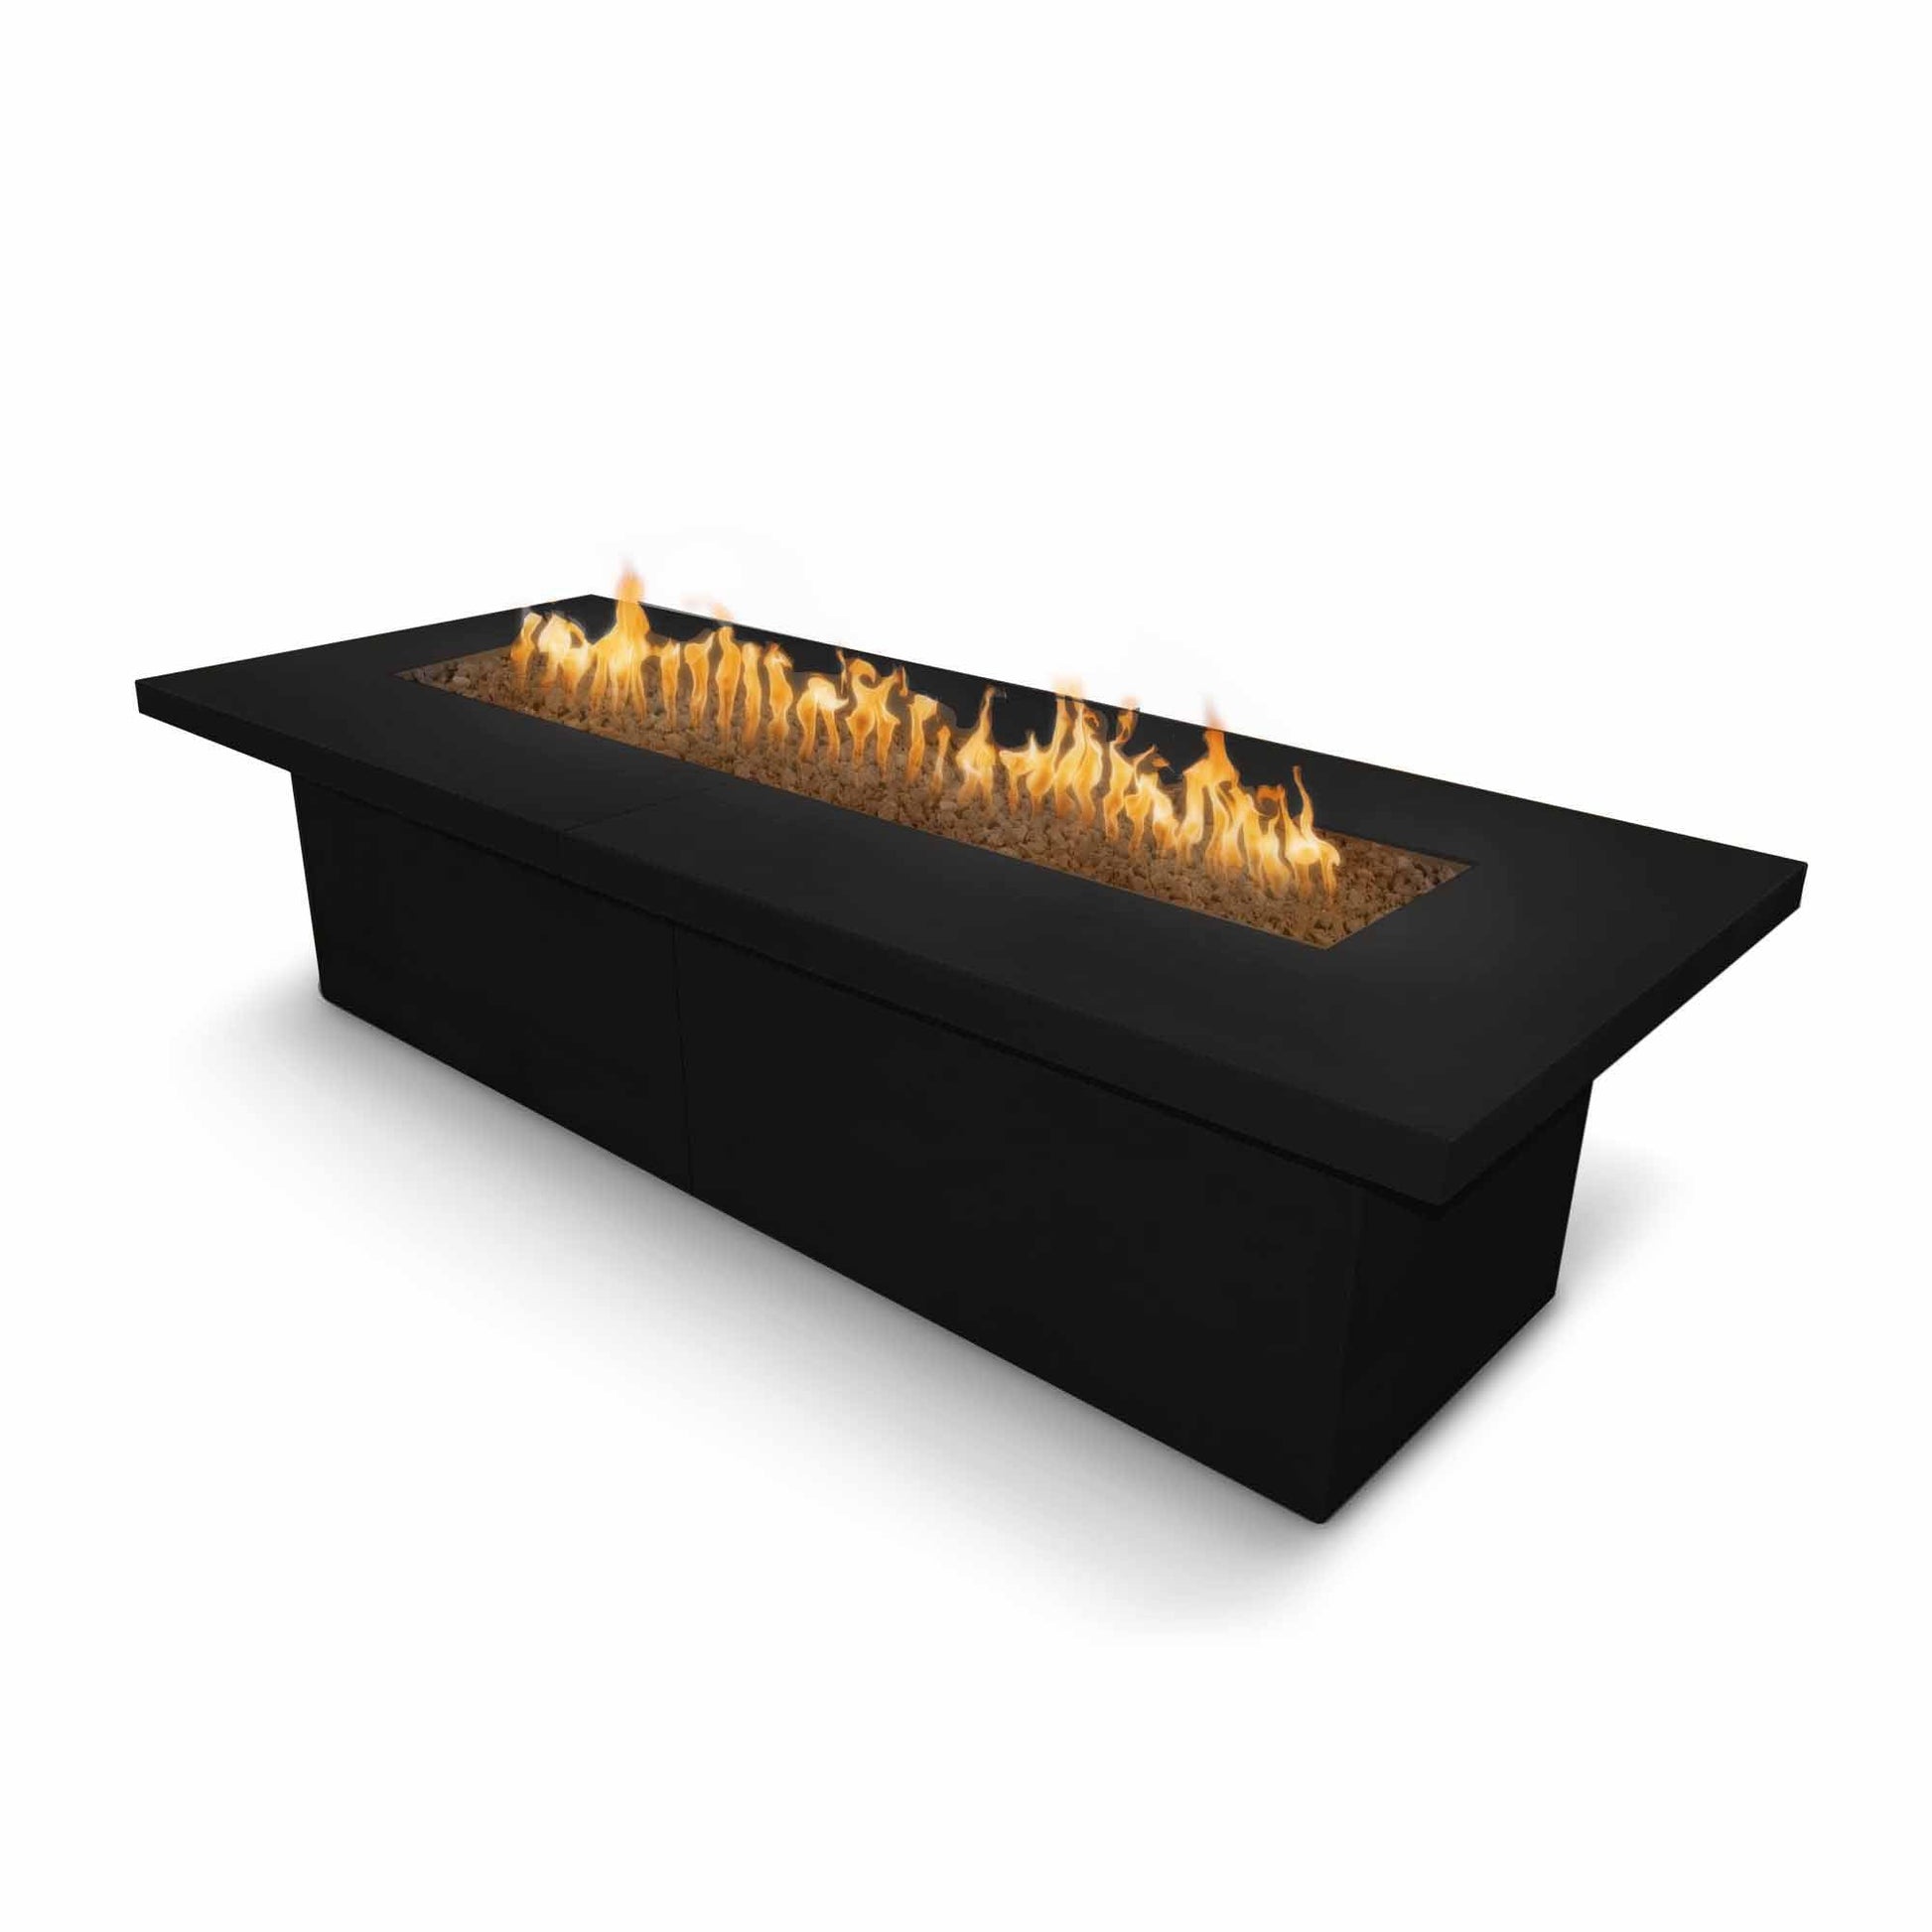 The Outdoor Plus Rectangular Newport 120" Black Powder Coated Metal Liquid Propane Fire Pit with Flame Sense with Spark Ignition